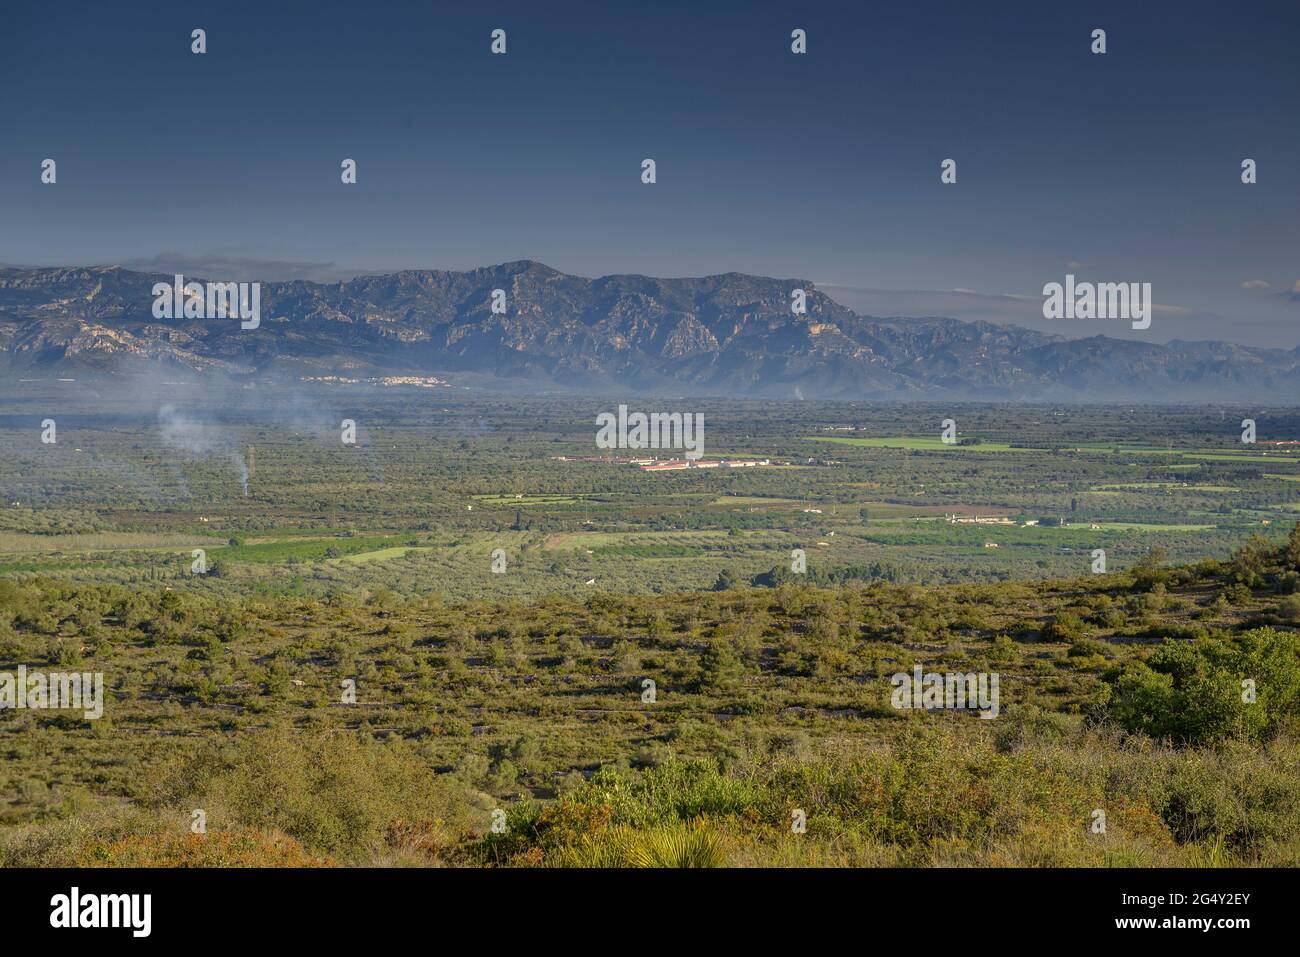 Pla de la Galera plain, which is an immense sea of olive trees and, in the background, the Ports - Puertos massif (Tarragona, Catalonia, Spain) Stock Photo